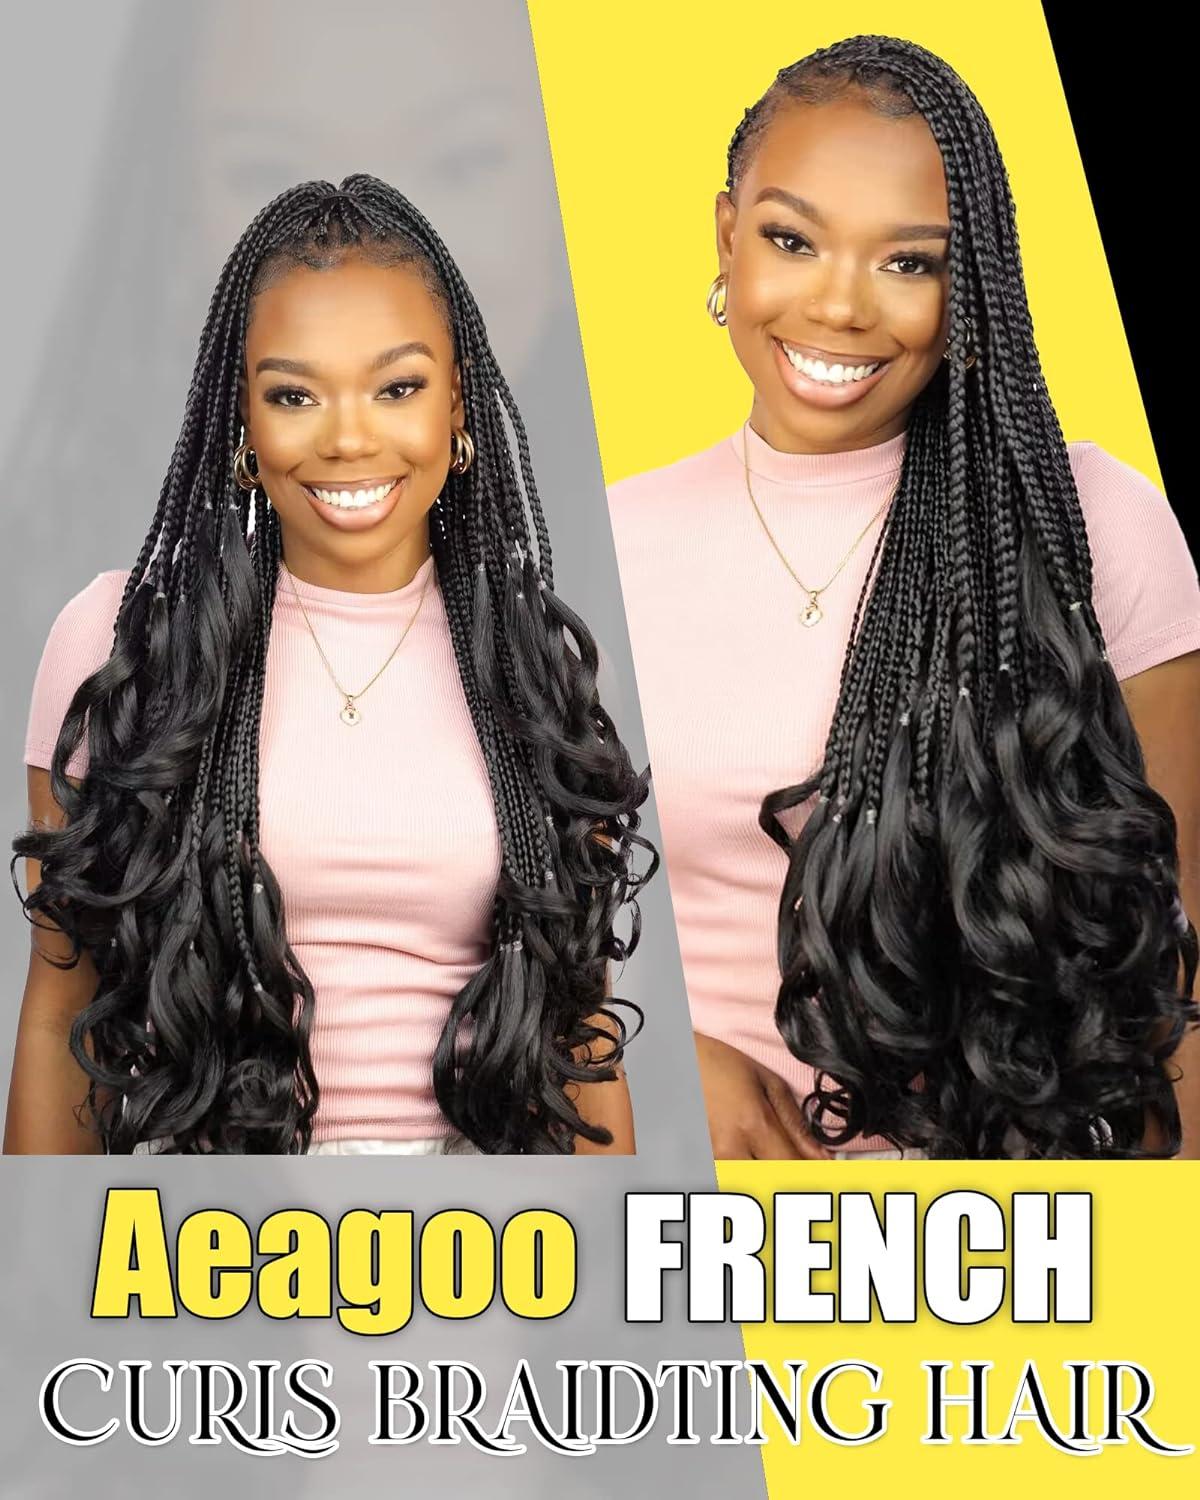  French Curly Braiding Hair Pre Stretched 20 Inch 8